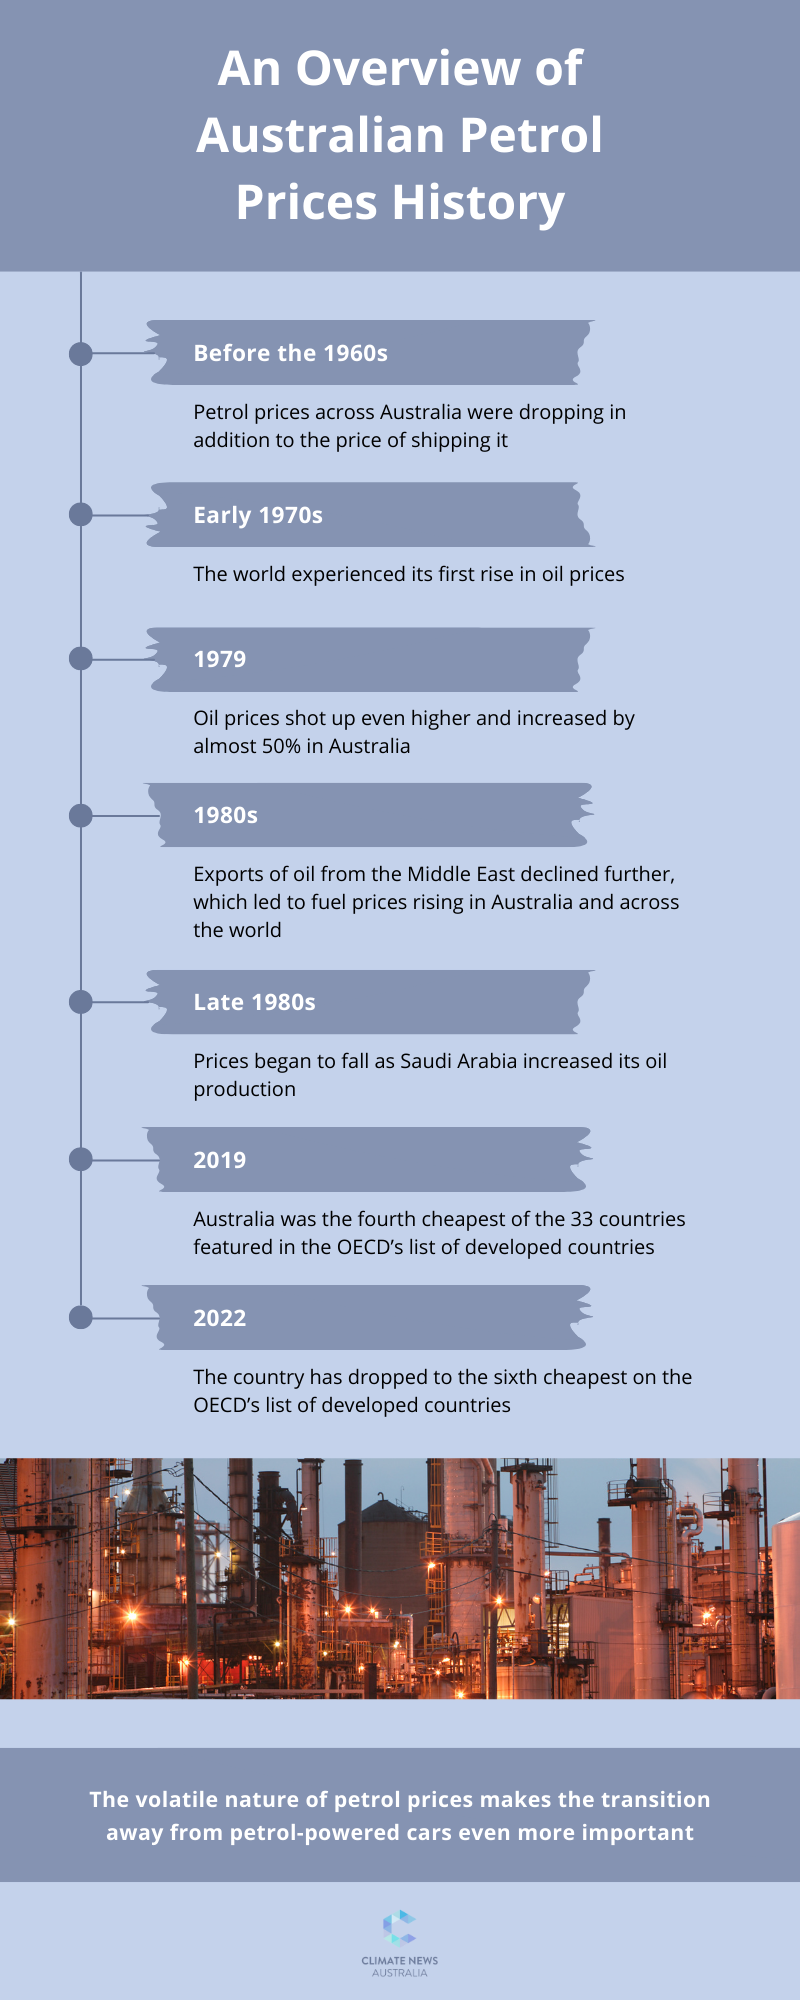 An Overview of Australian Petrol Prices History